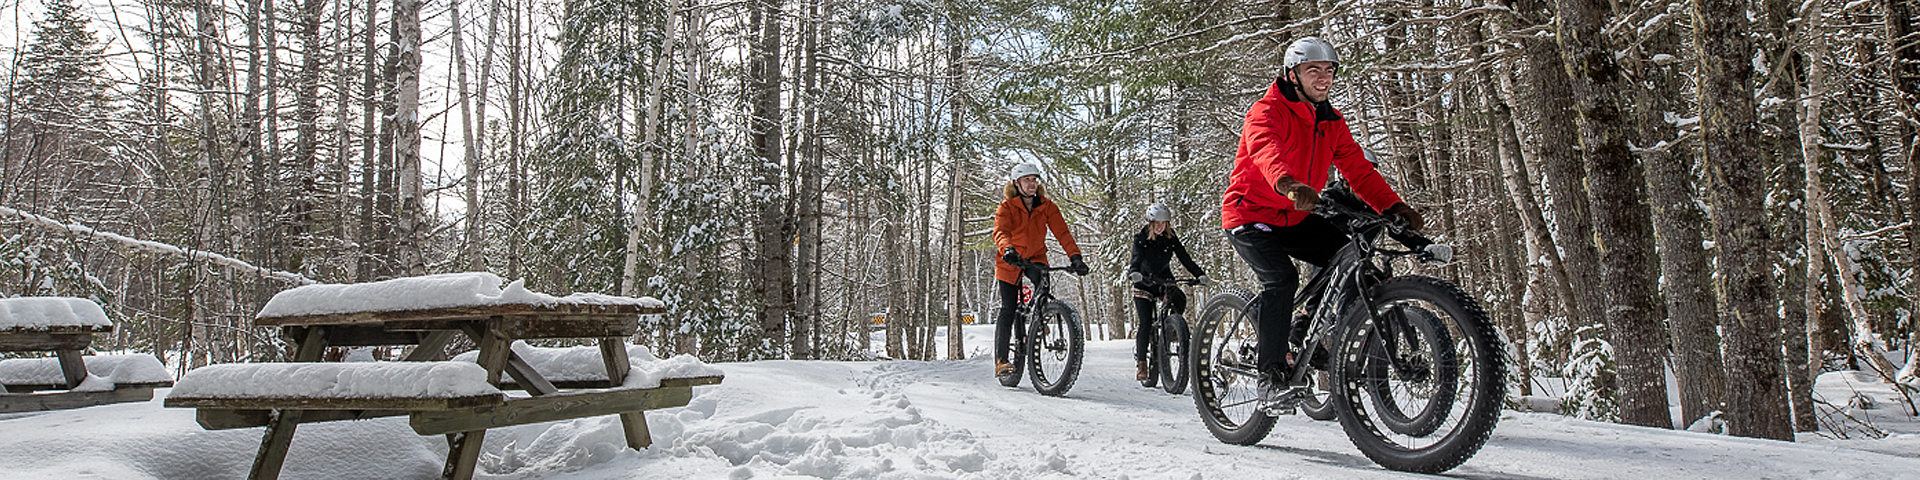 Cyclists on fat bikes in the snow, in the forest